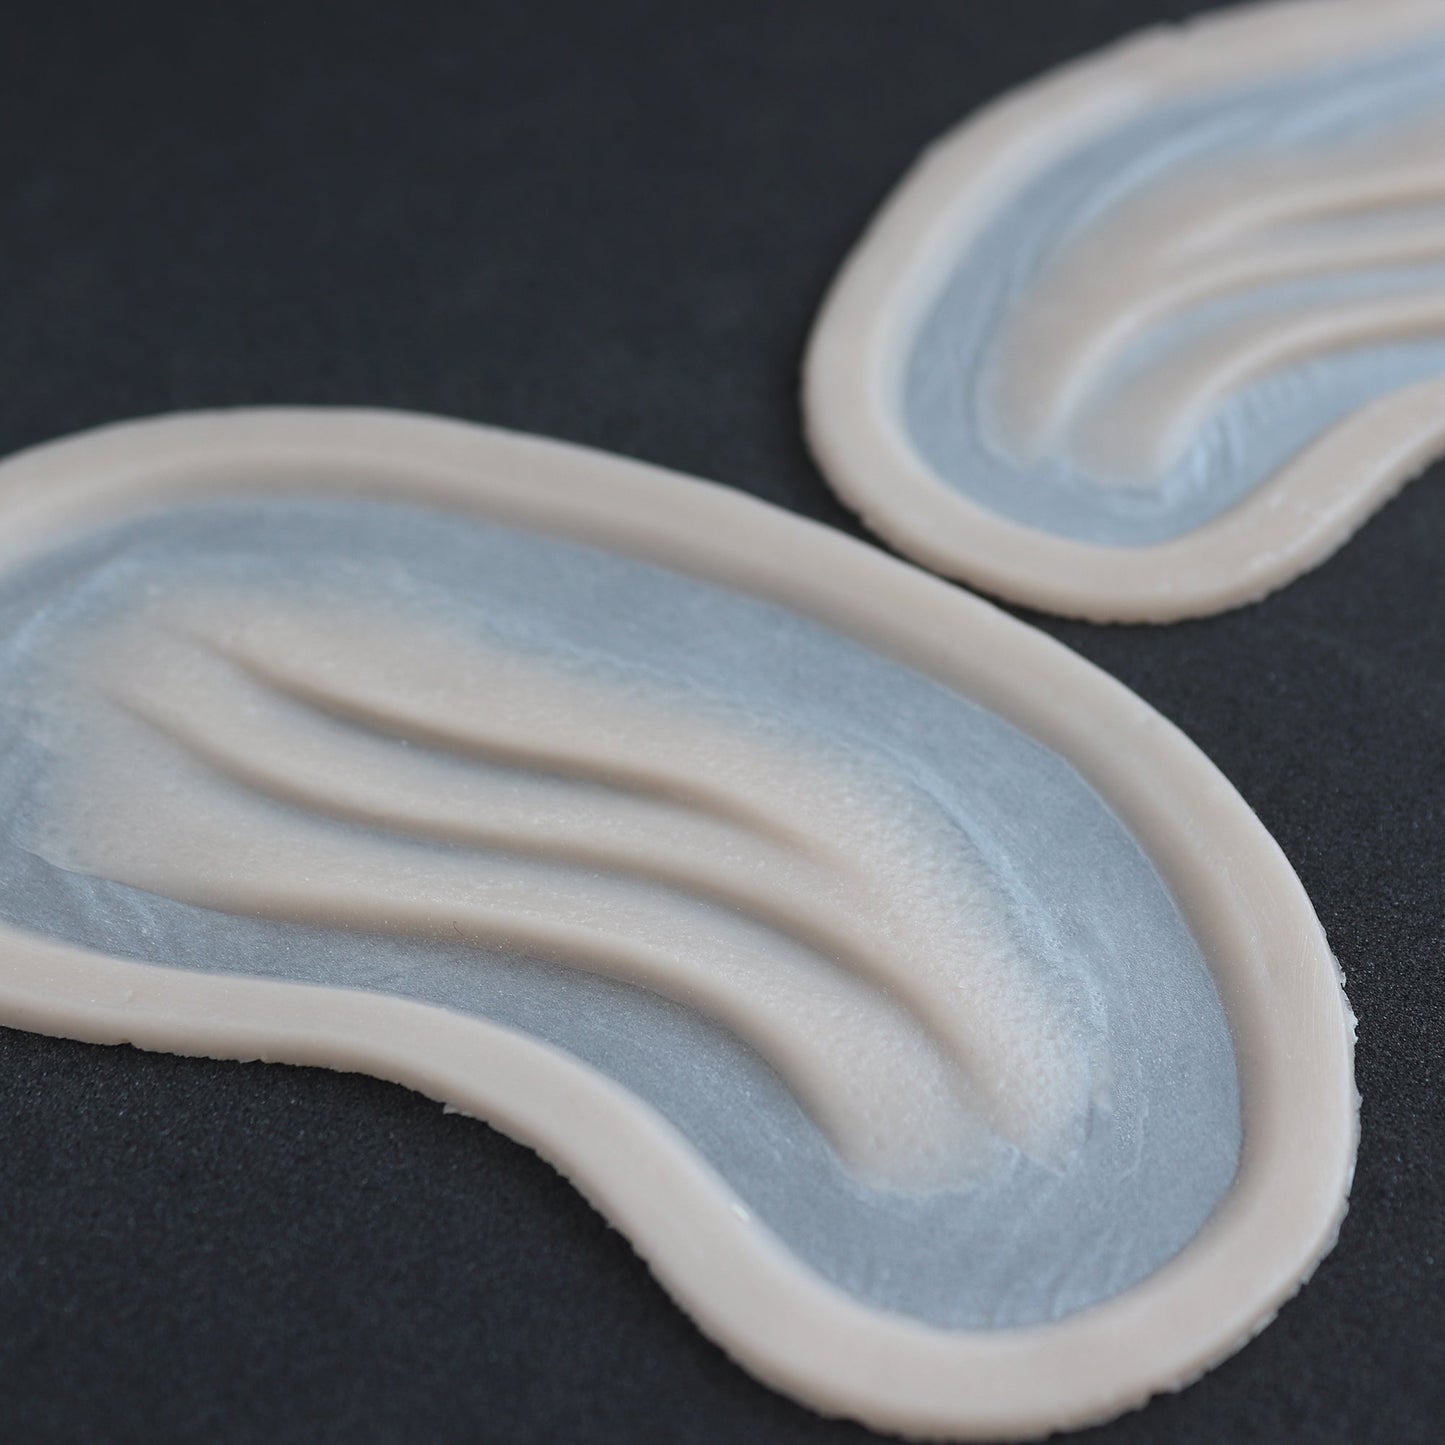 Manta Gills (Pair) - Silicone makeup prosthetic in vanilla shade on a black surface